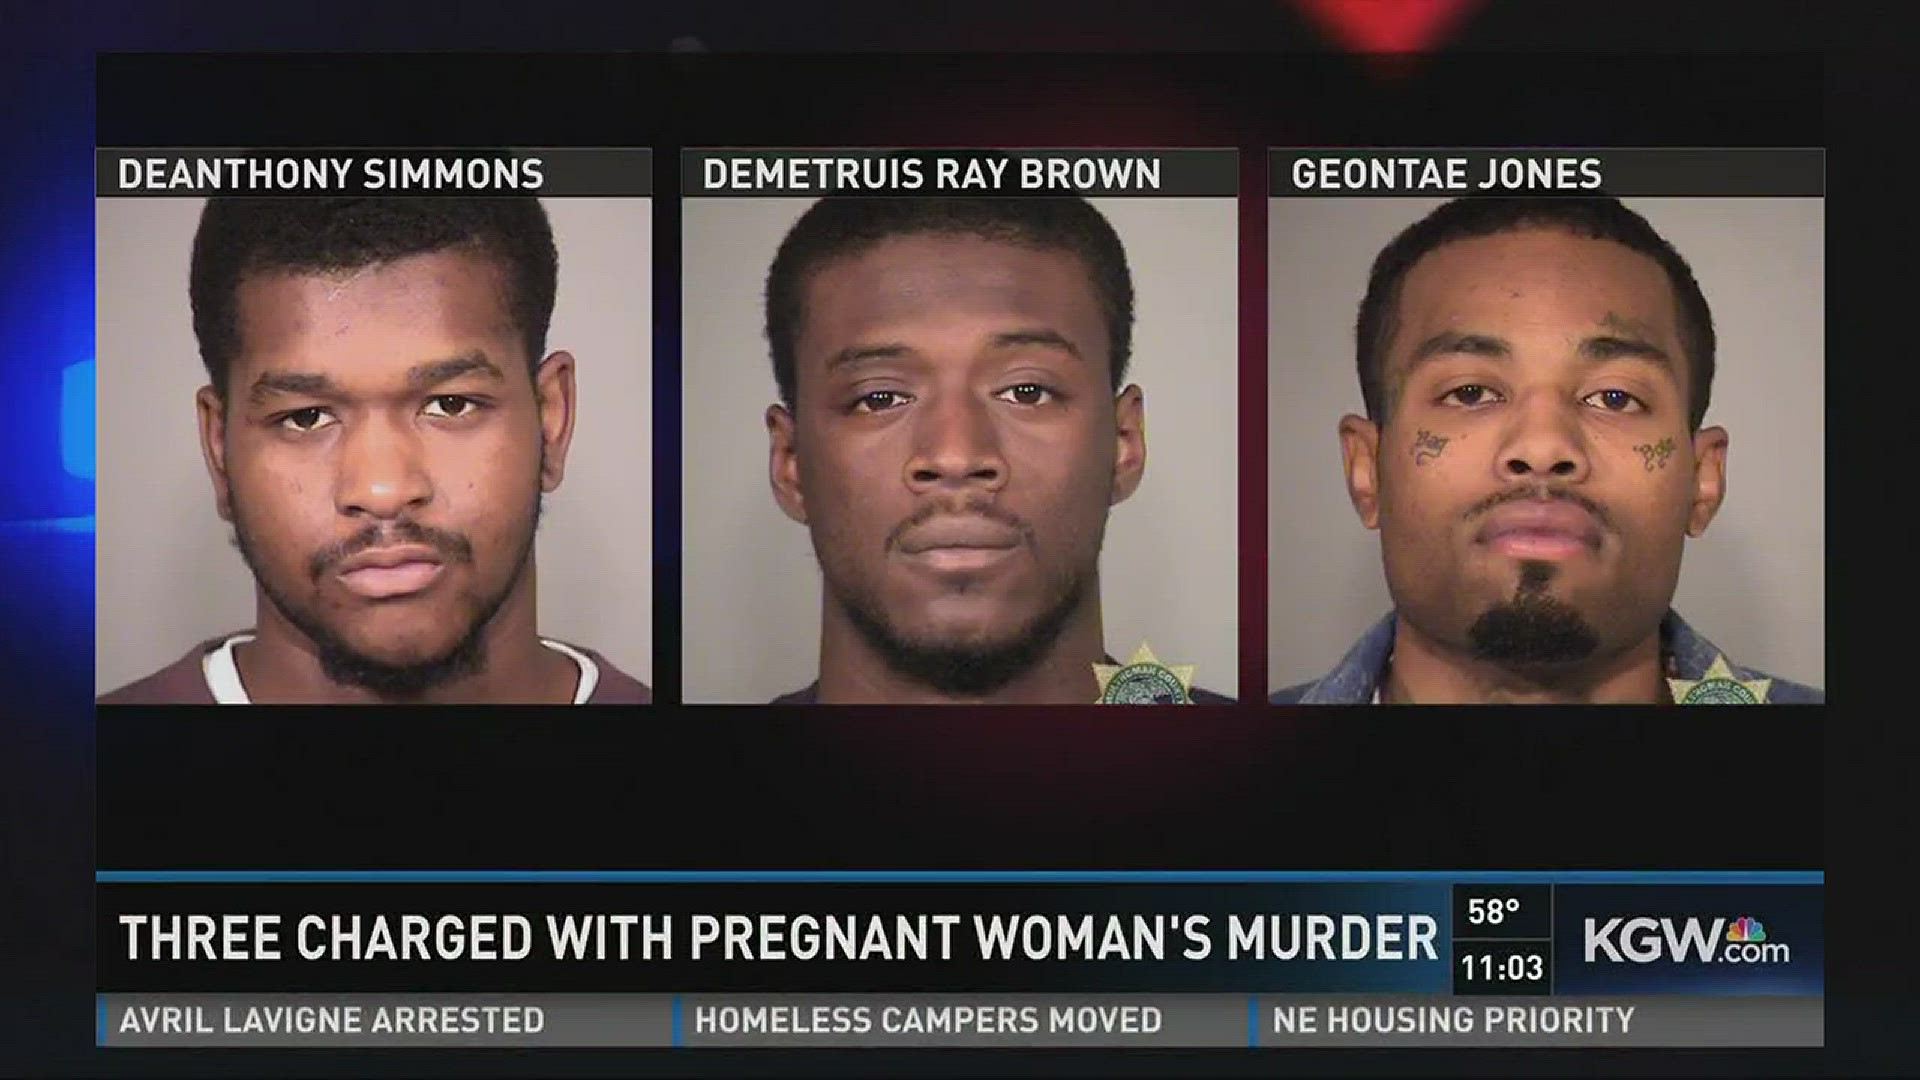 Three charged with pregnant woman's murder